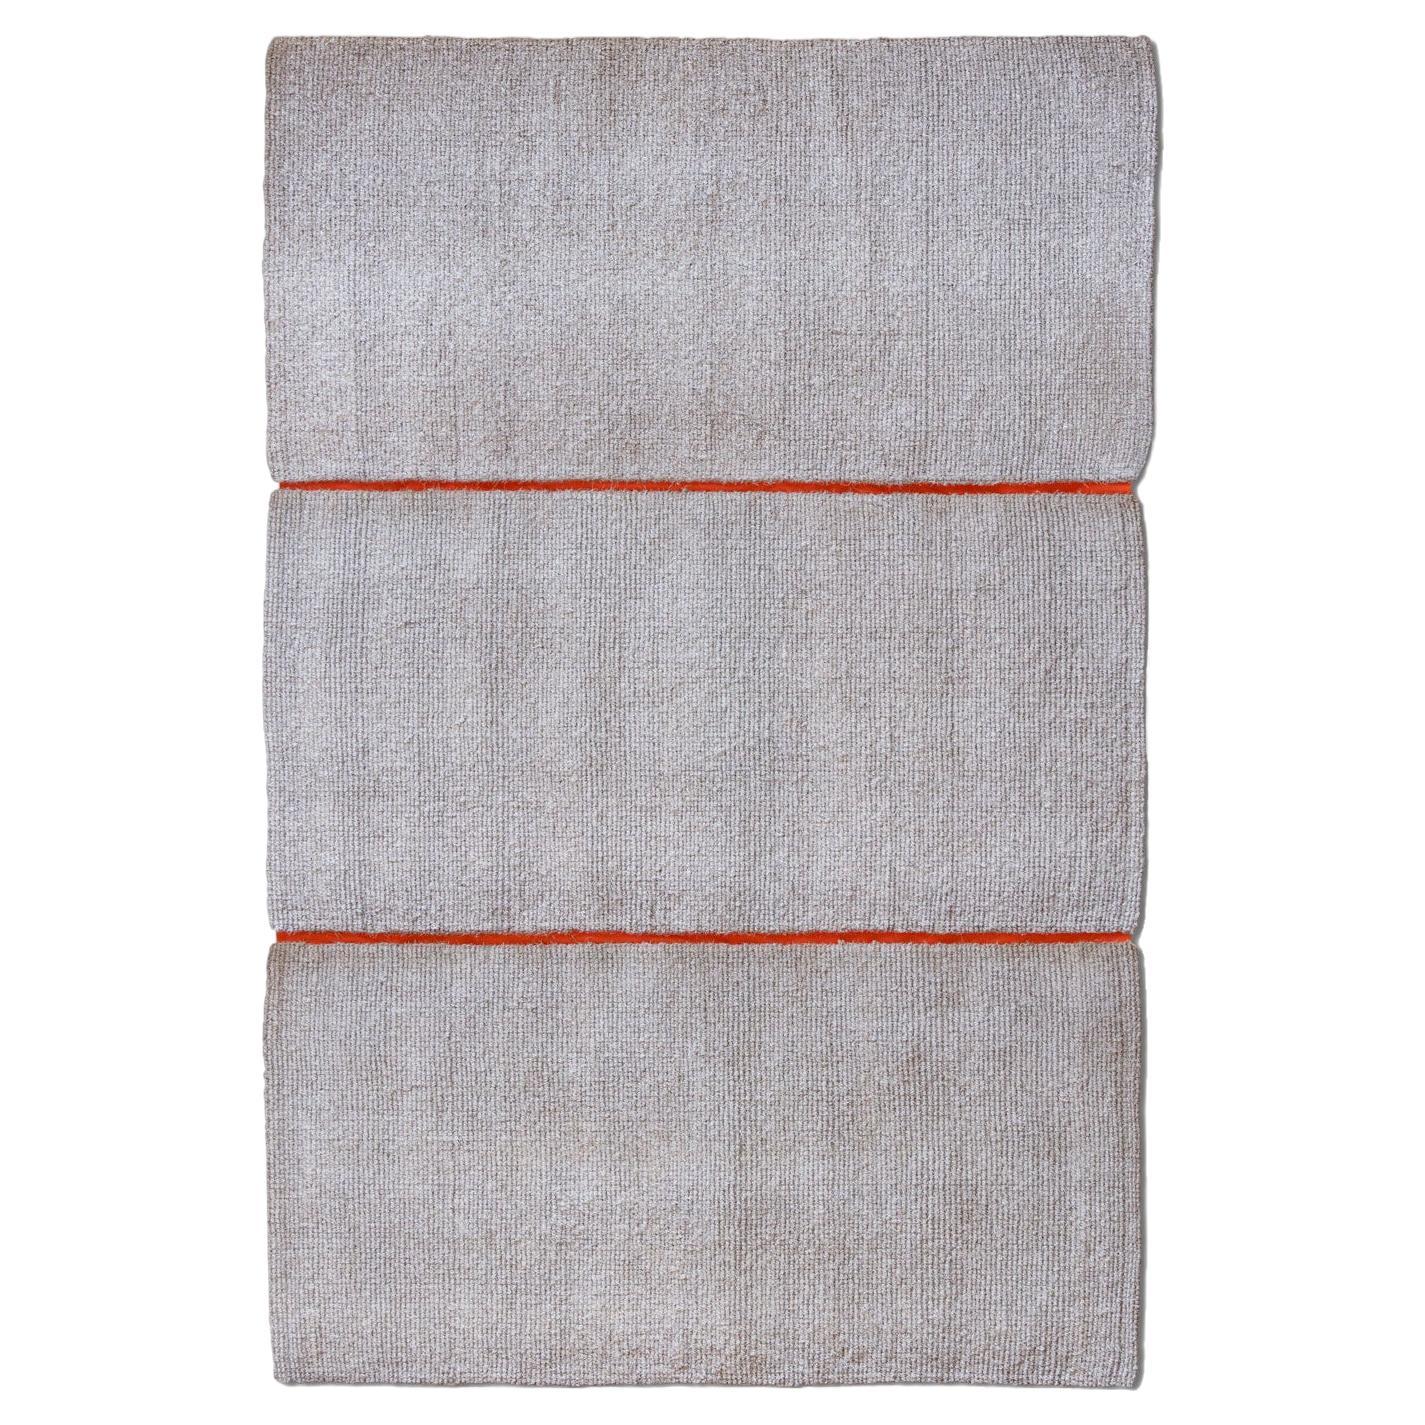 Modular Outdoor Indoor Natural White Coconut Rug by Deanna Comellini 195x285 cm